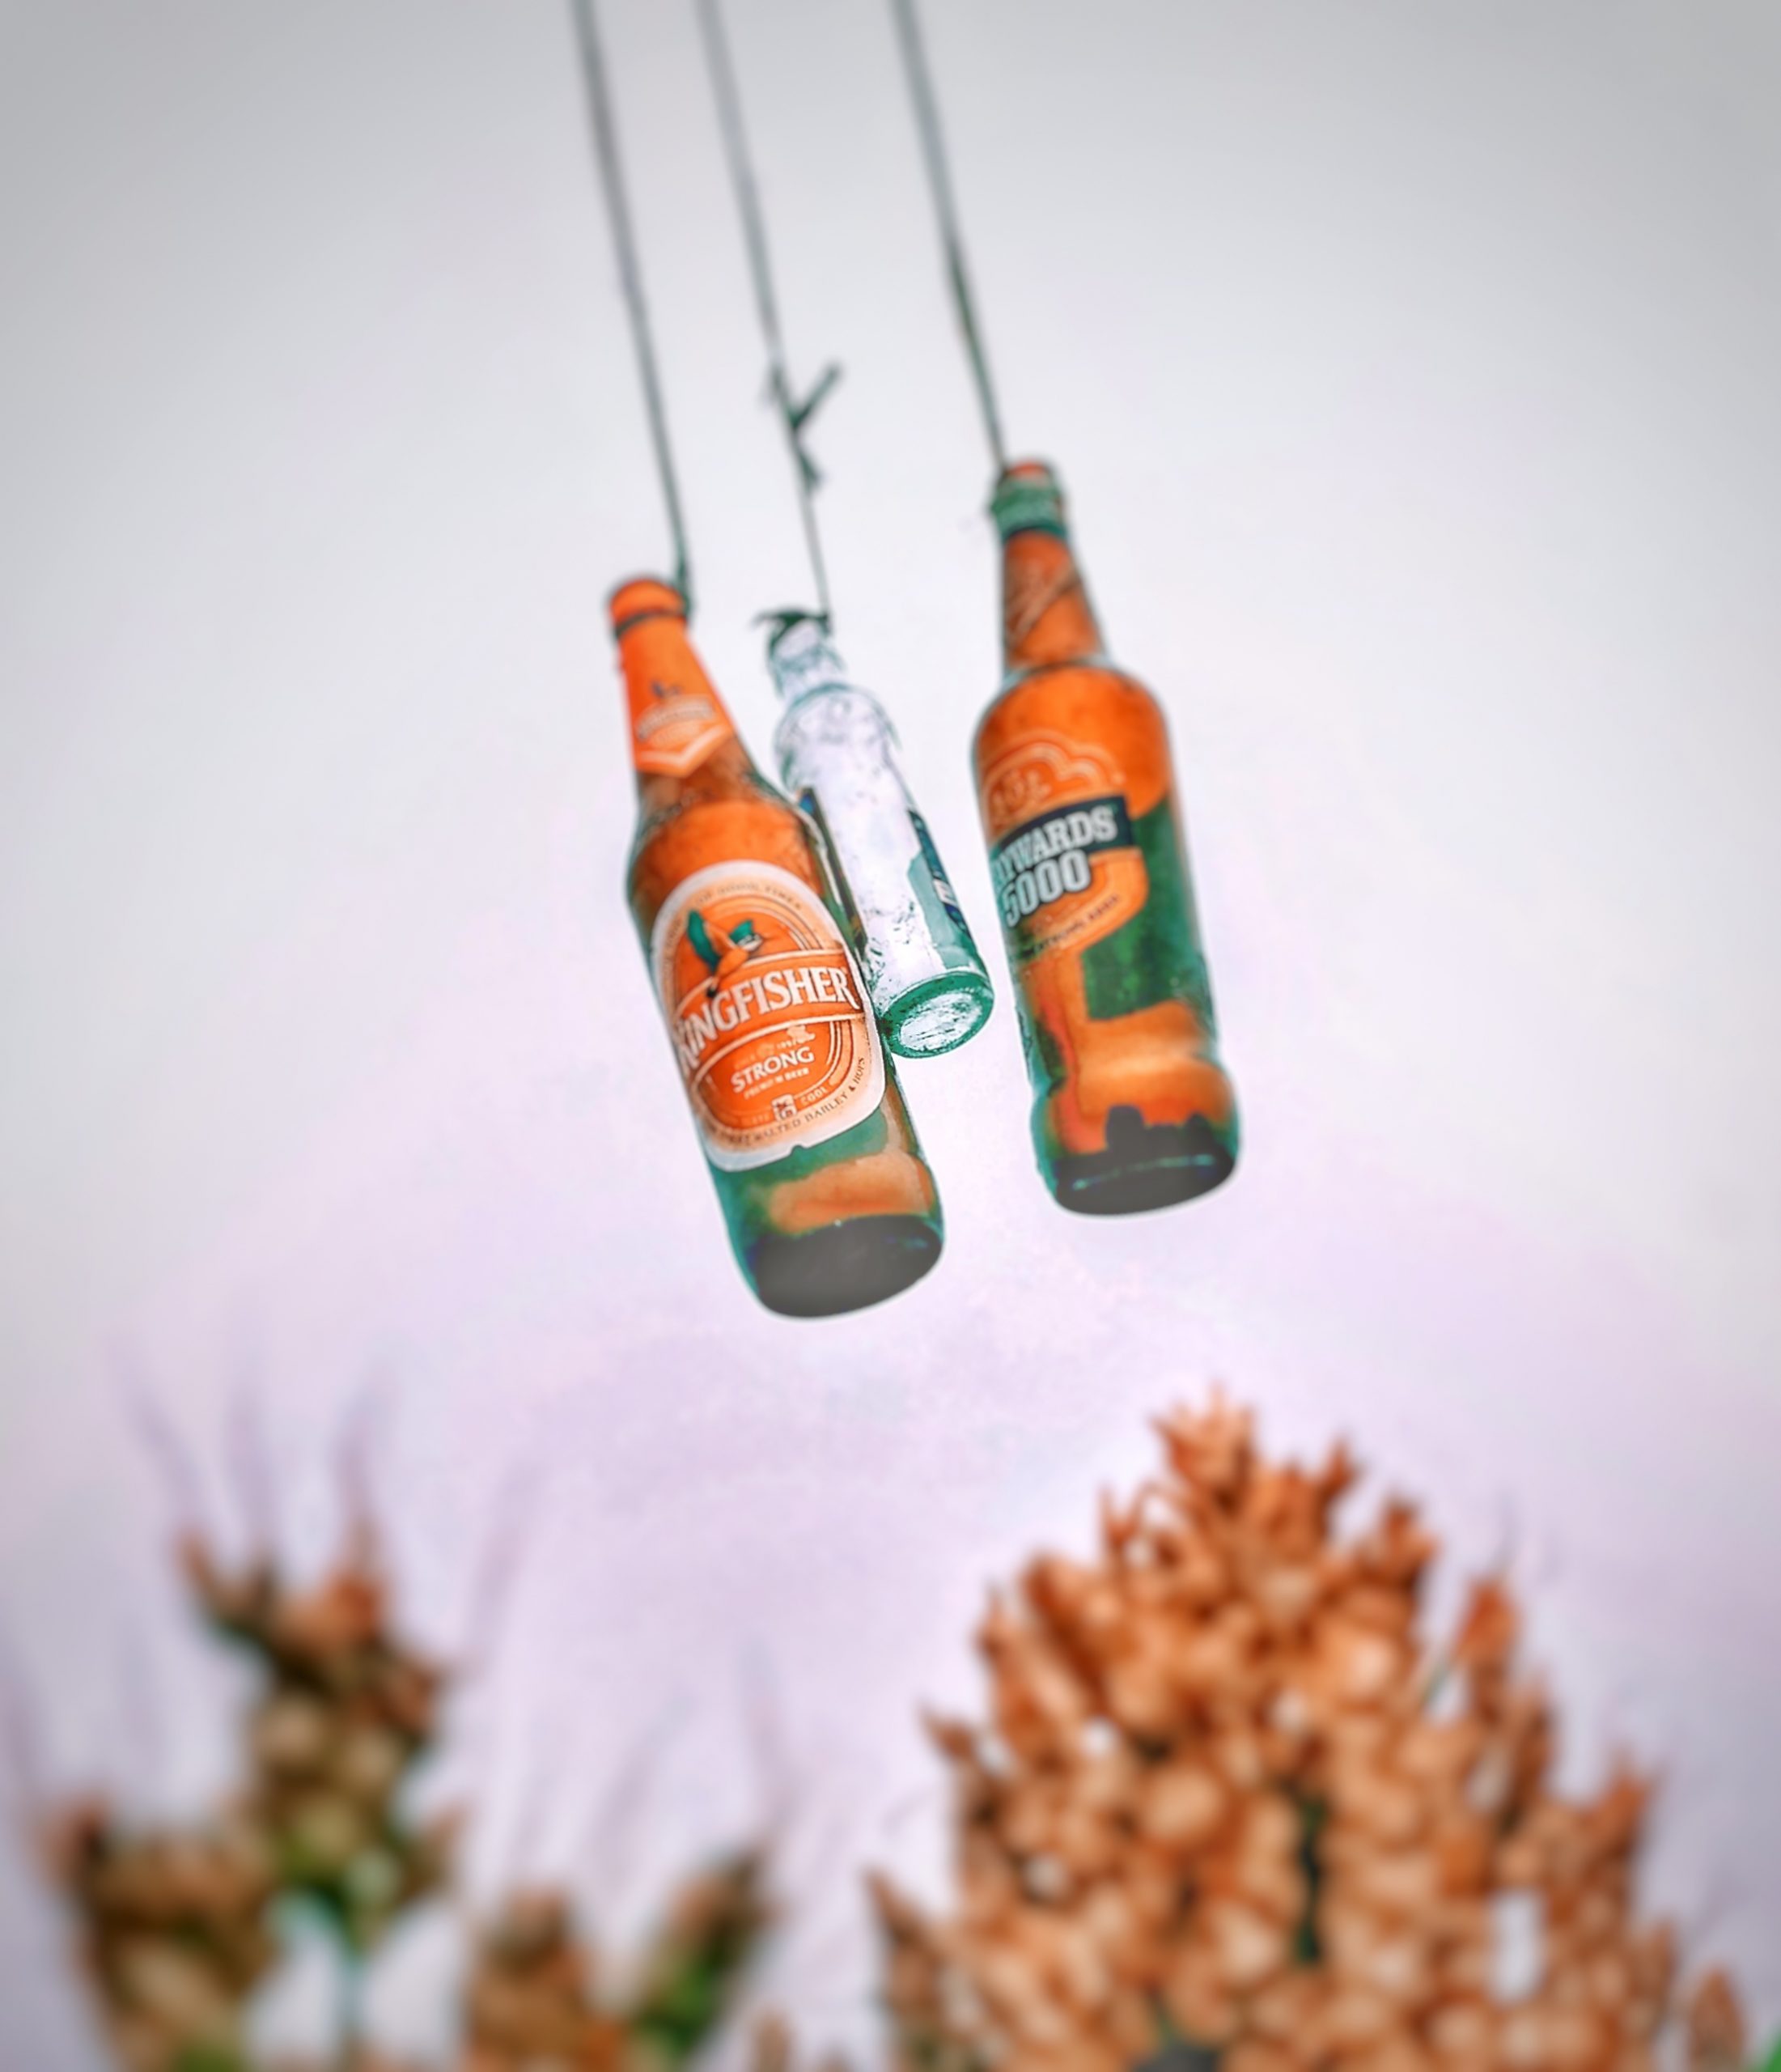 Beer bottles hanging with ropes